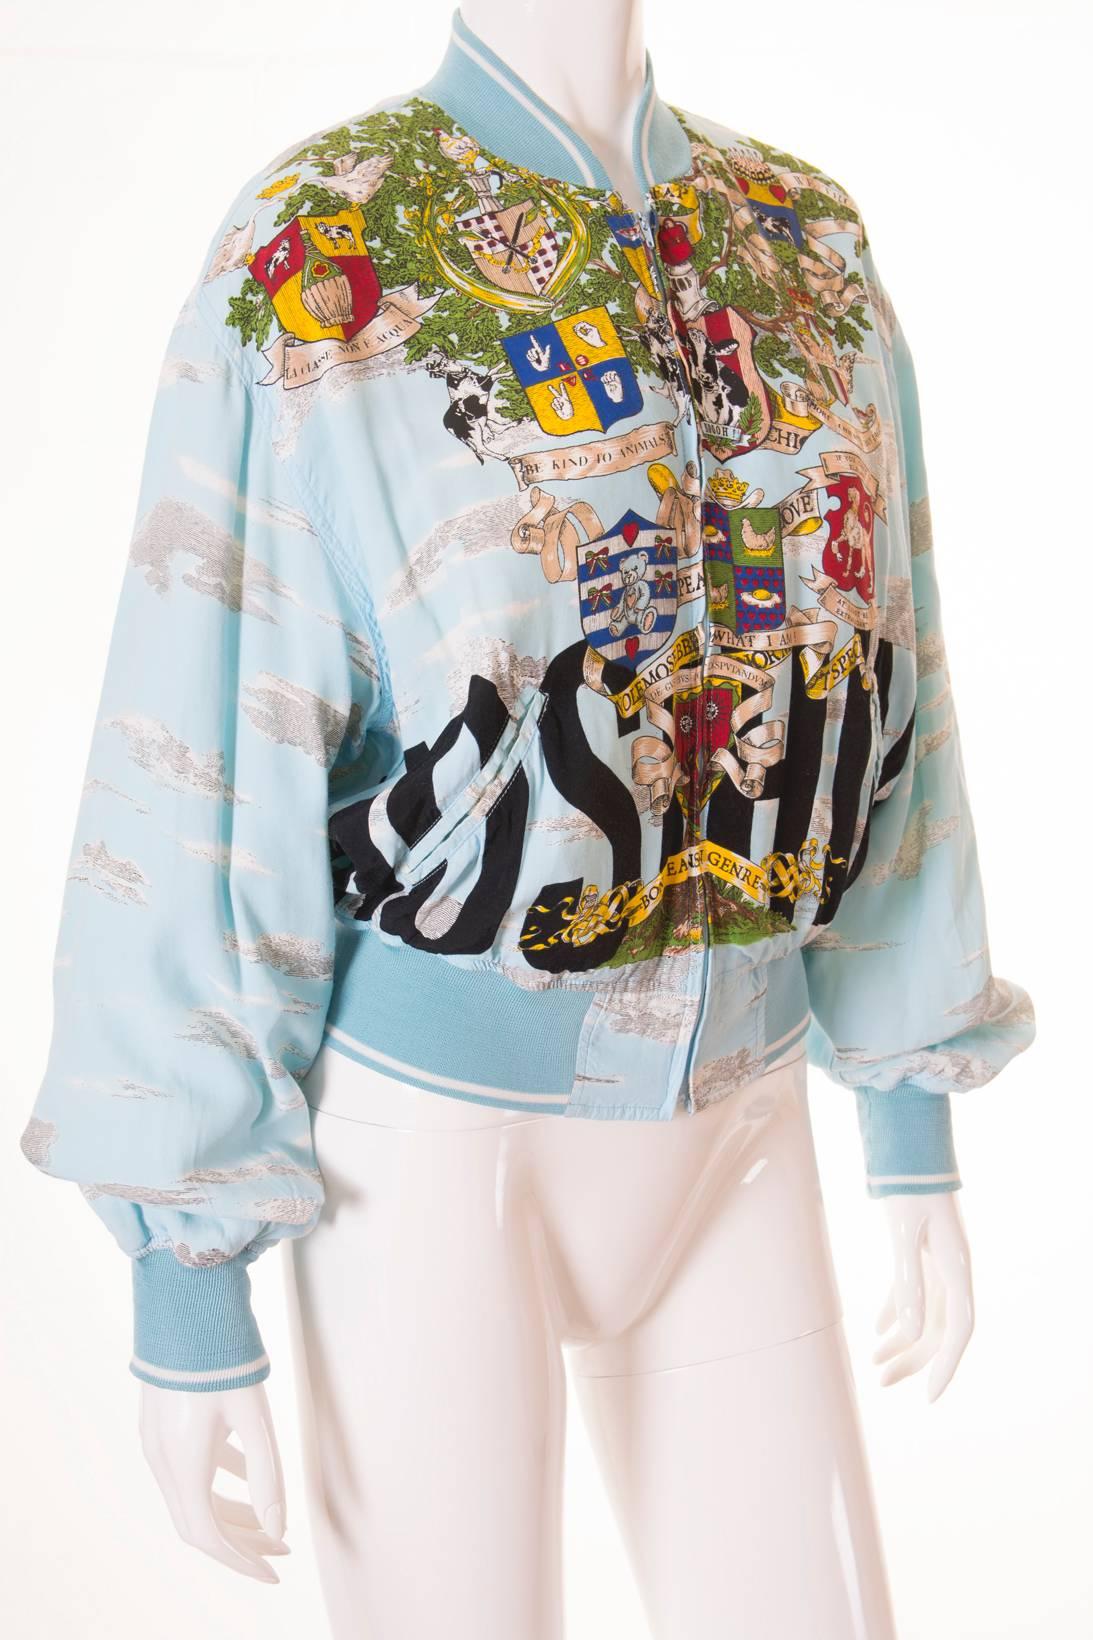 This bomber jacket by Moschino jeans features an incredibly detailed tree print and a huge Moschino logo emblazoned at both the front and the back.  Moschino slogans all over the jacket including “Be kind to animals”, “Volemossebene”, “More chickens